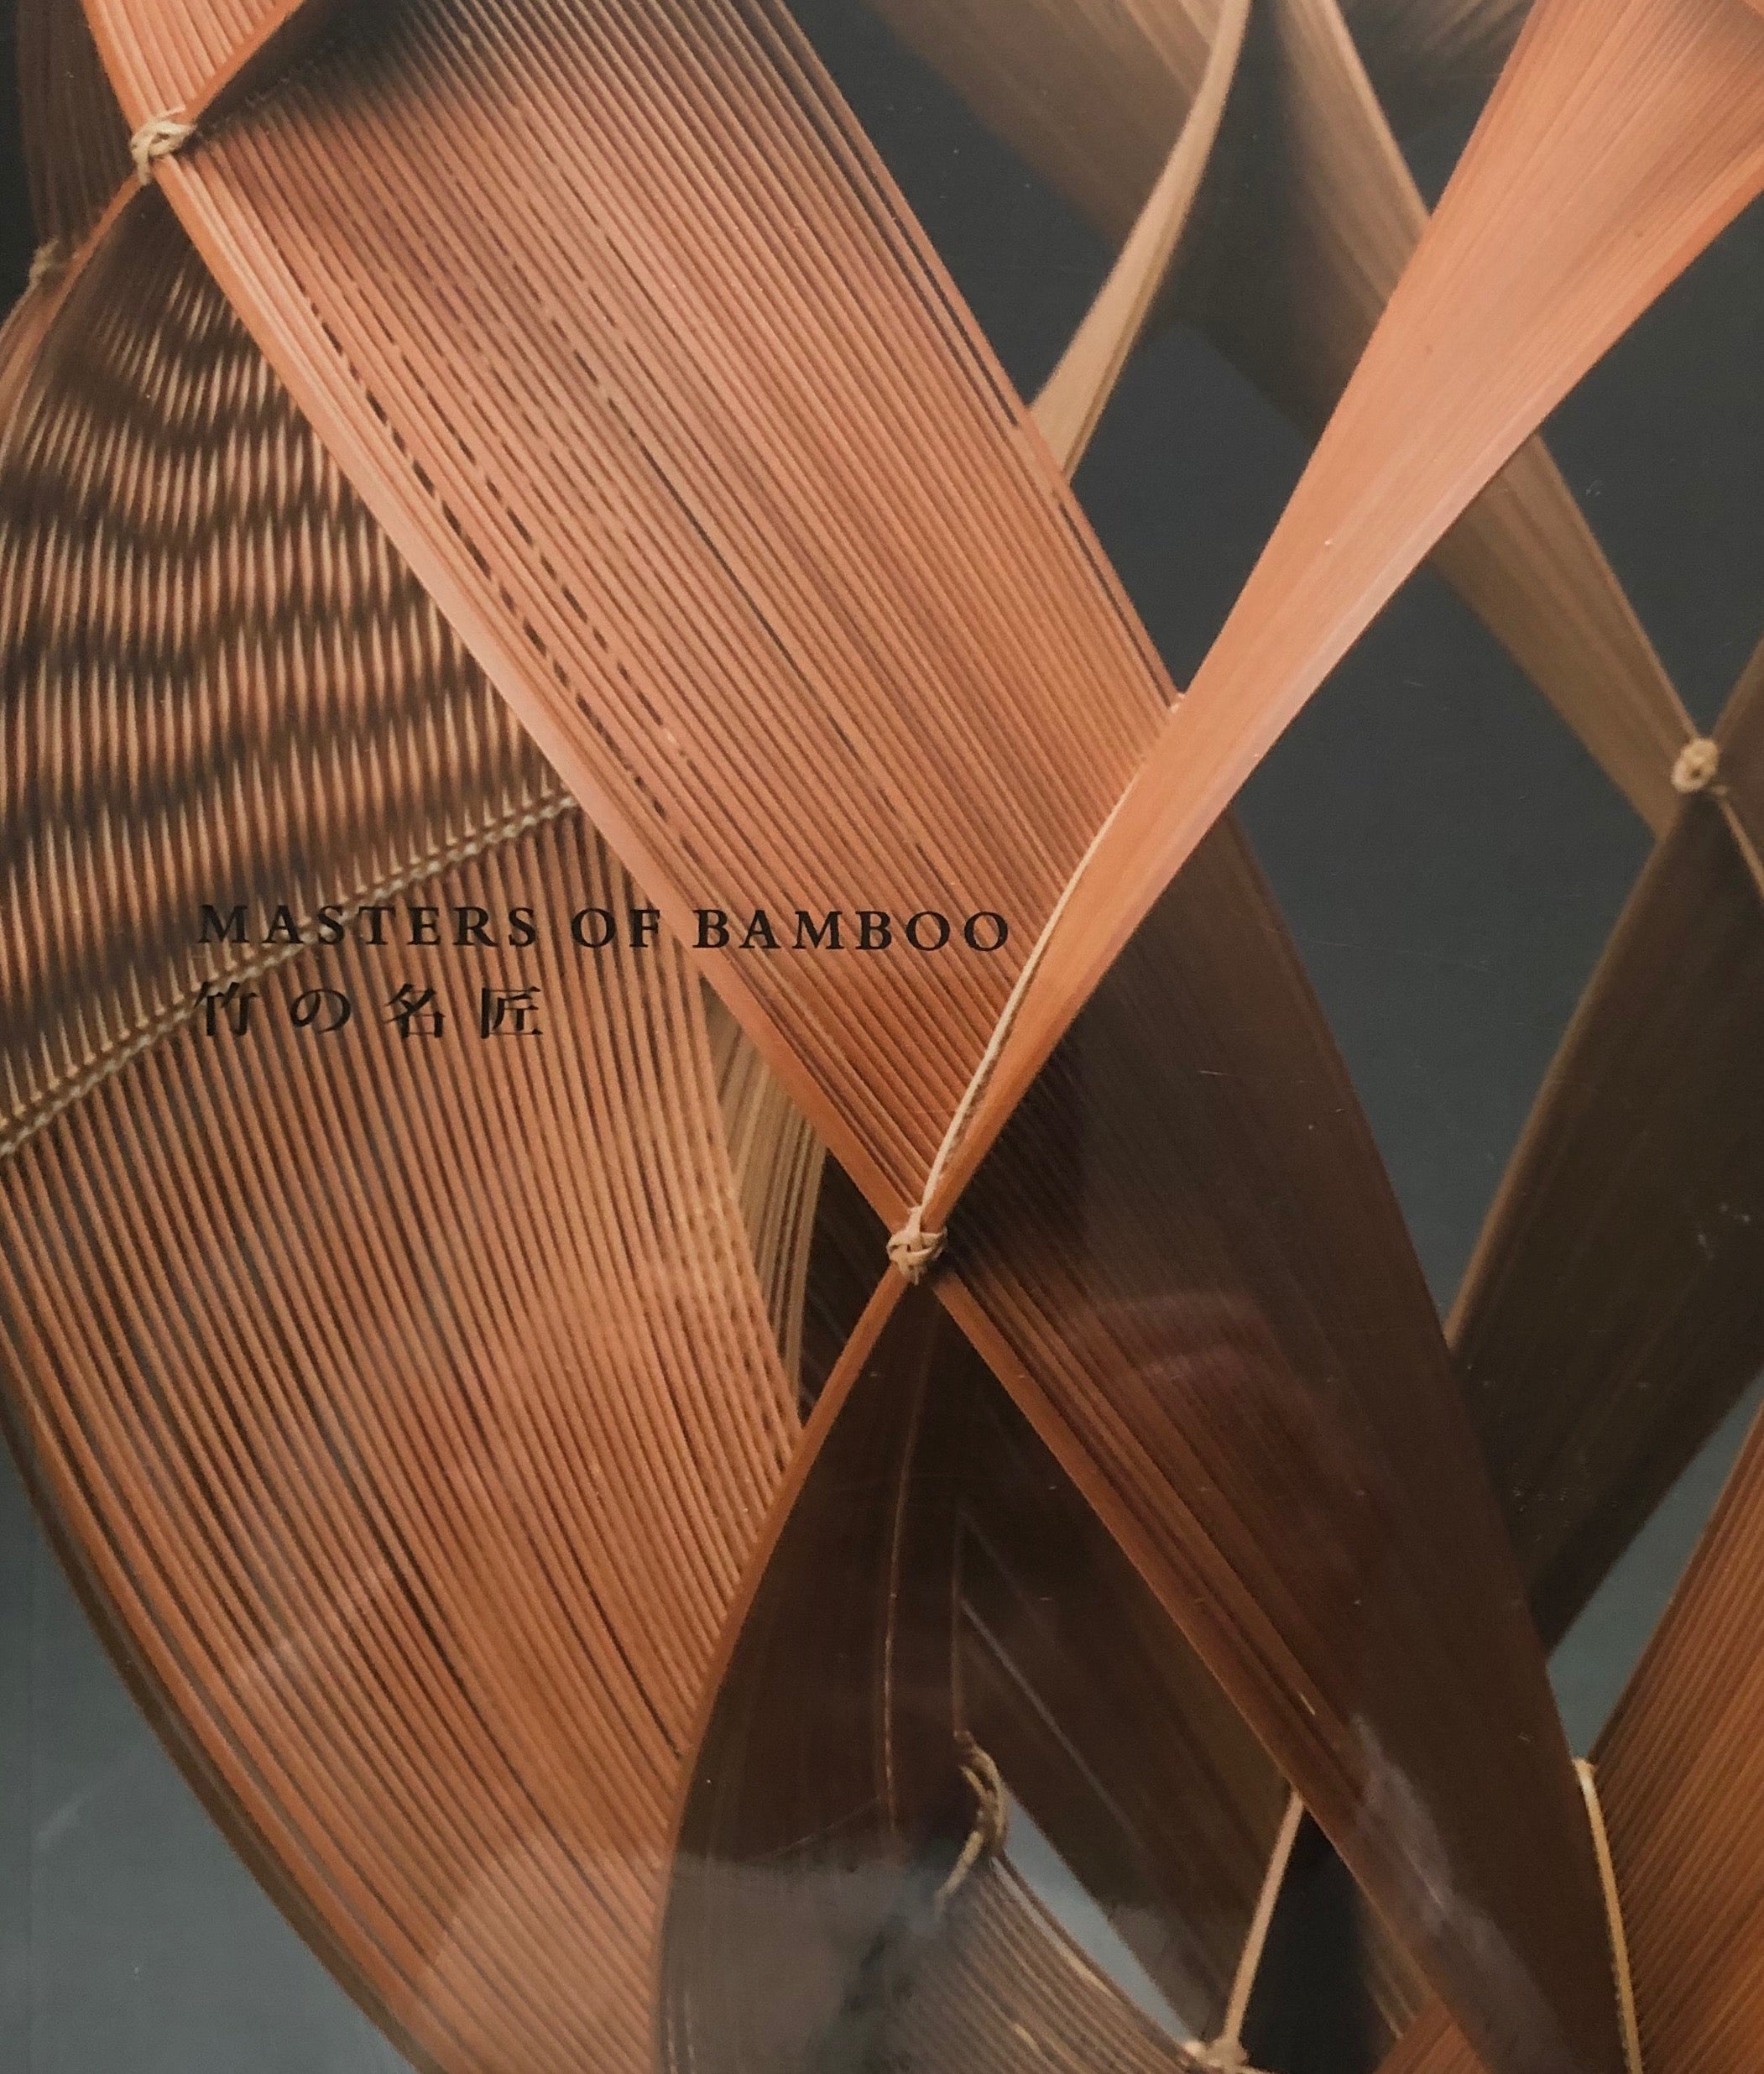 Book, Masters of Bamboo 